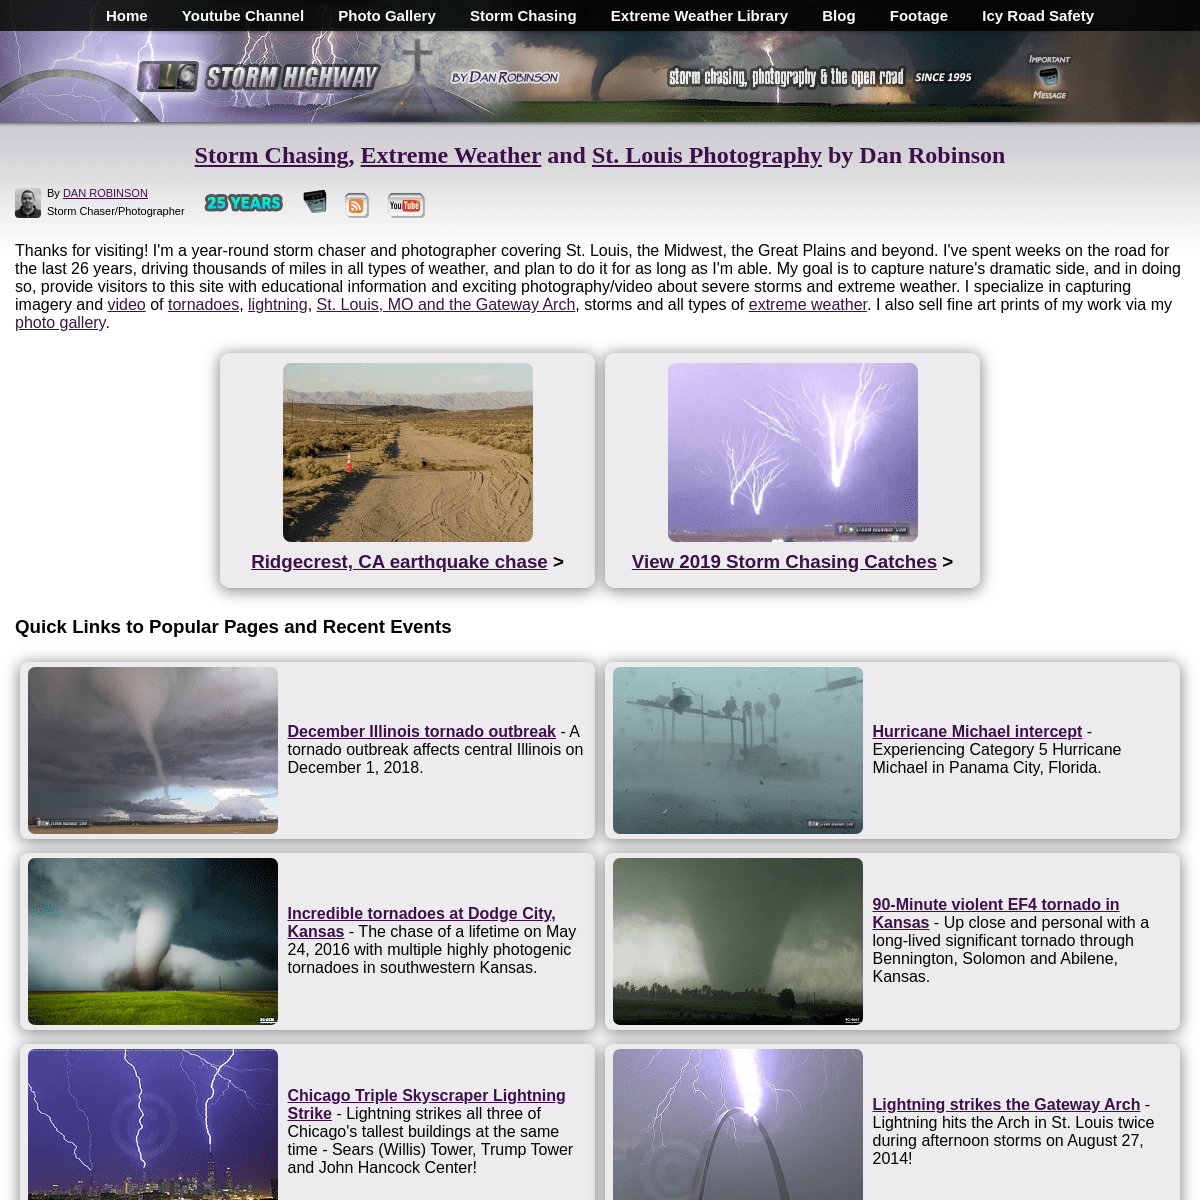 A complete backup of stormhighway.com